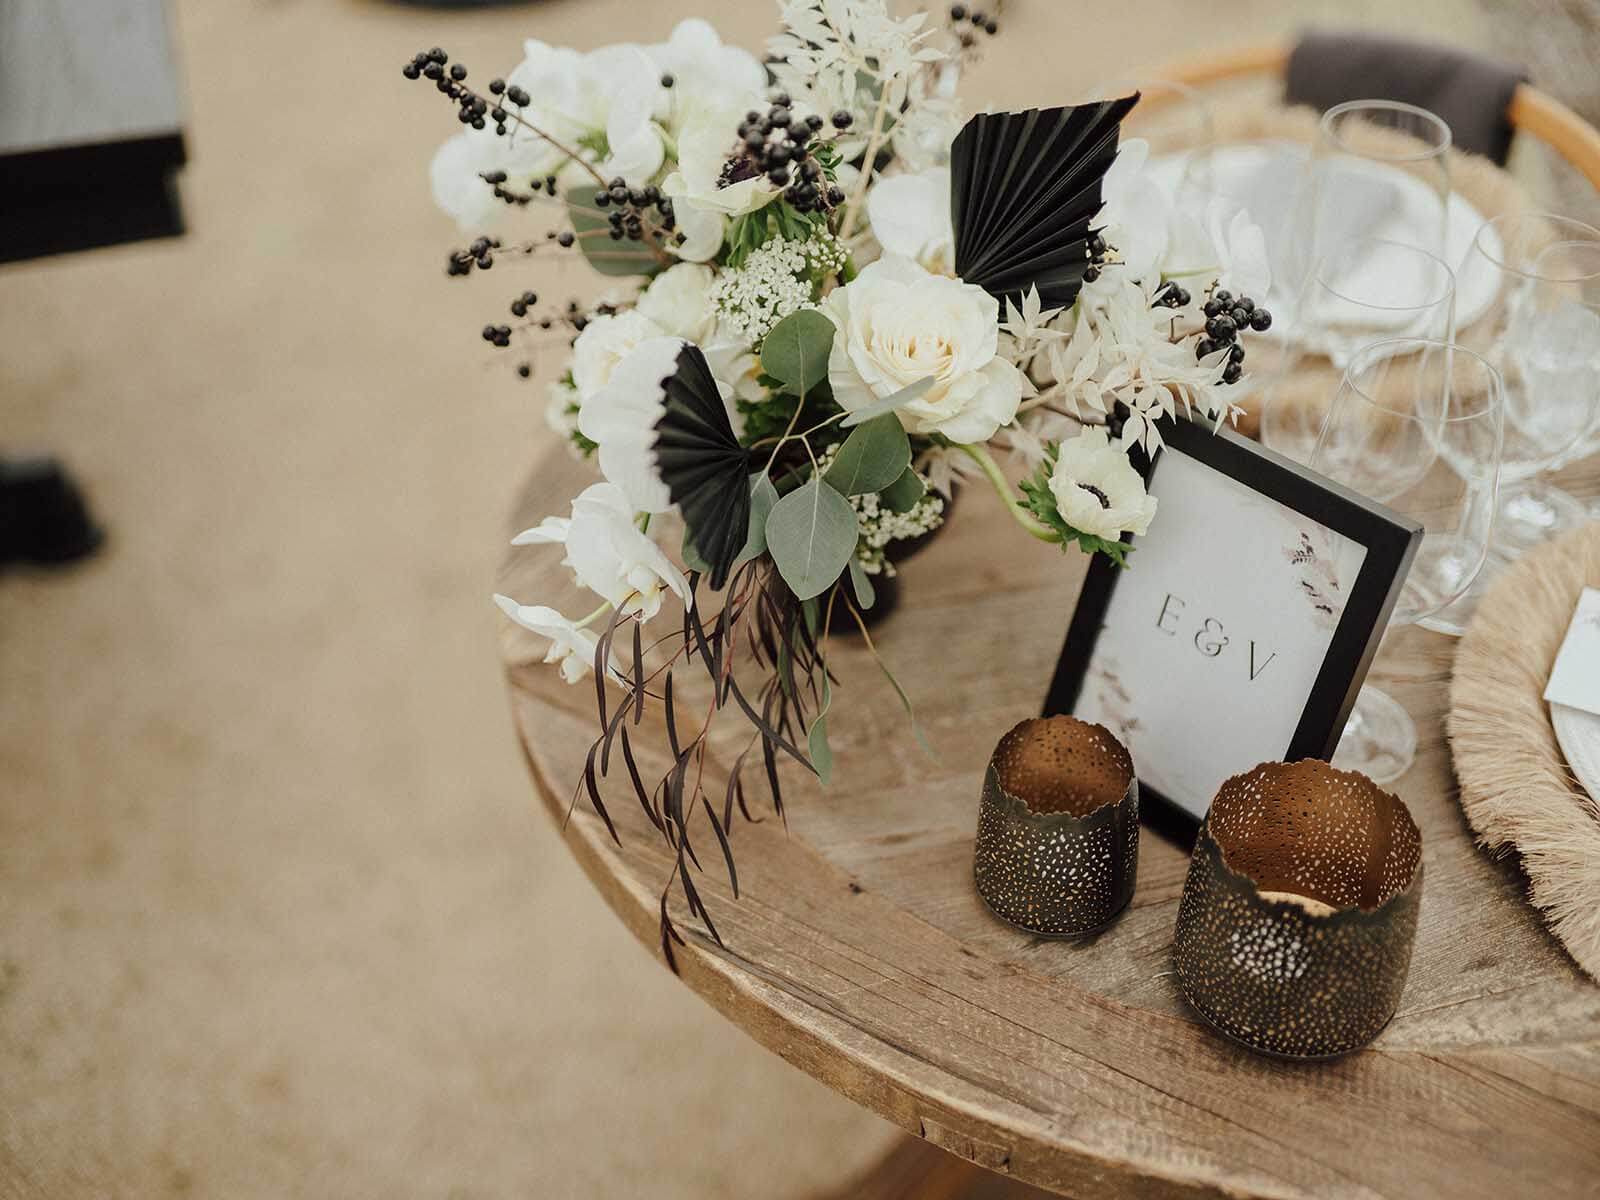 An elegant black and white floral arrangement on the wedding table.